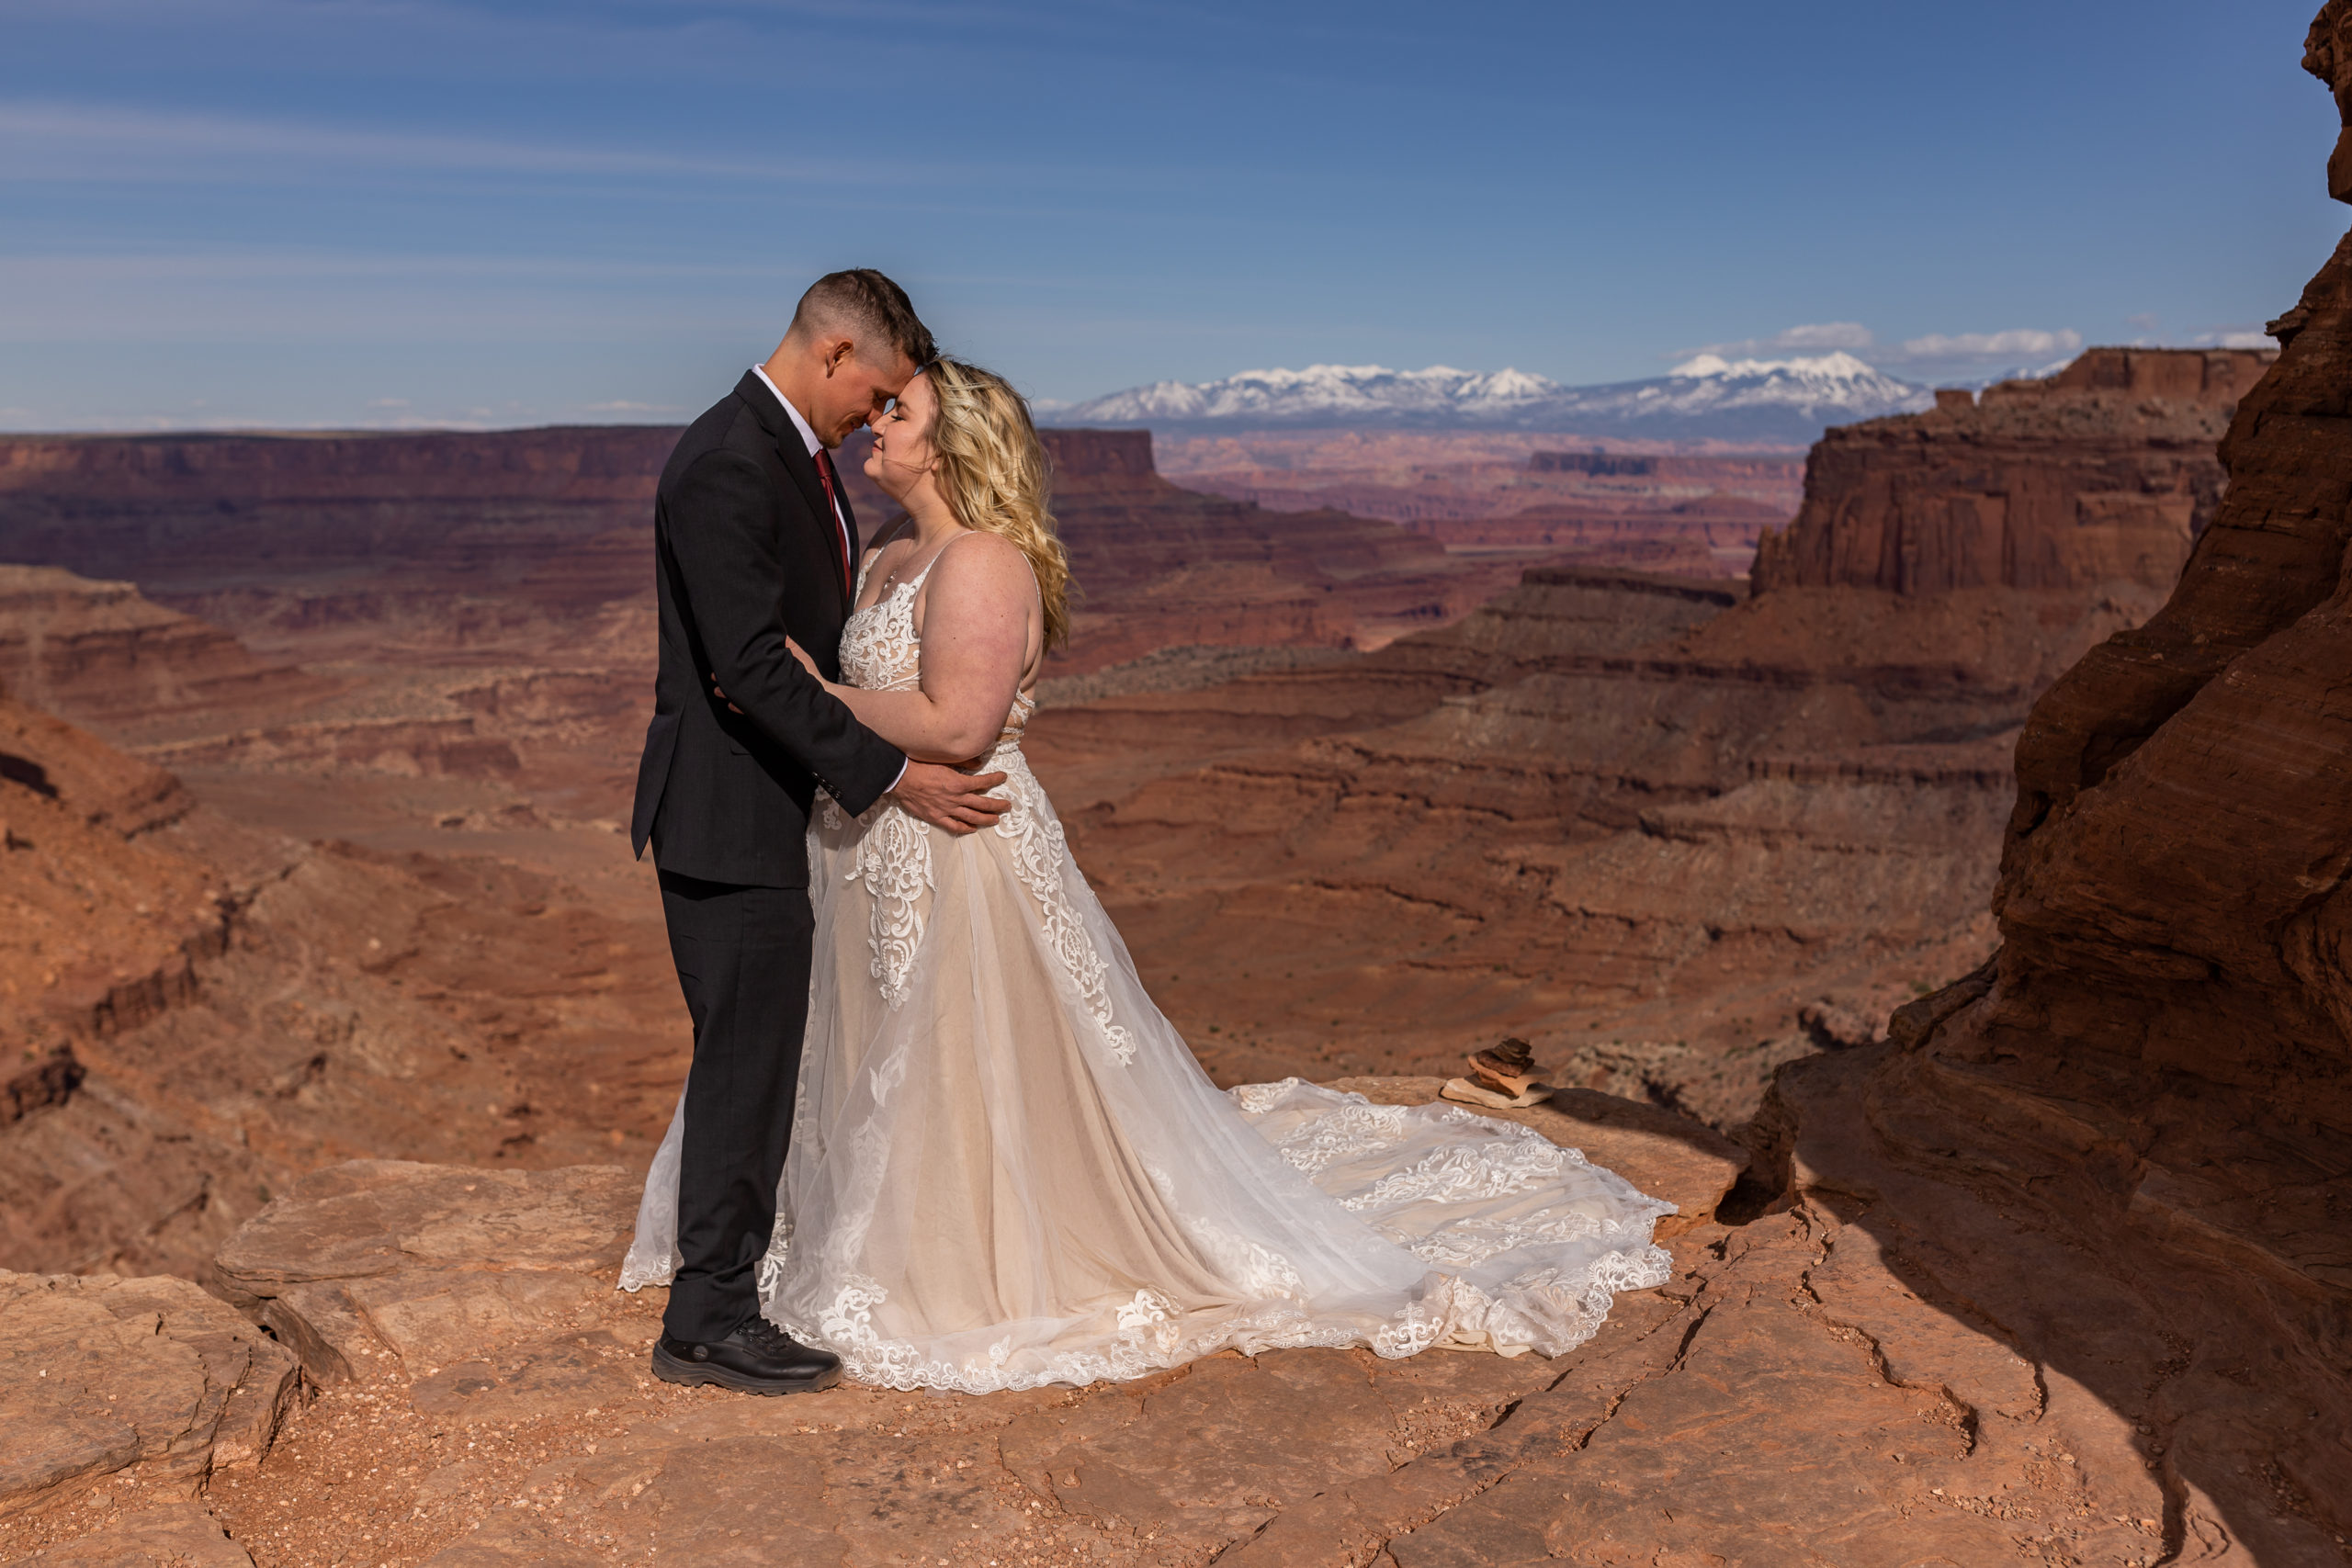 Bride and groom stand on cliff edge overlooking red sandstone canyon below in Canyonlands National Park. It is a clear day with blue skies and you can see the La Sal mountains way in the distance.